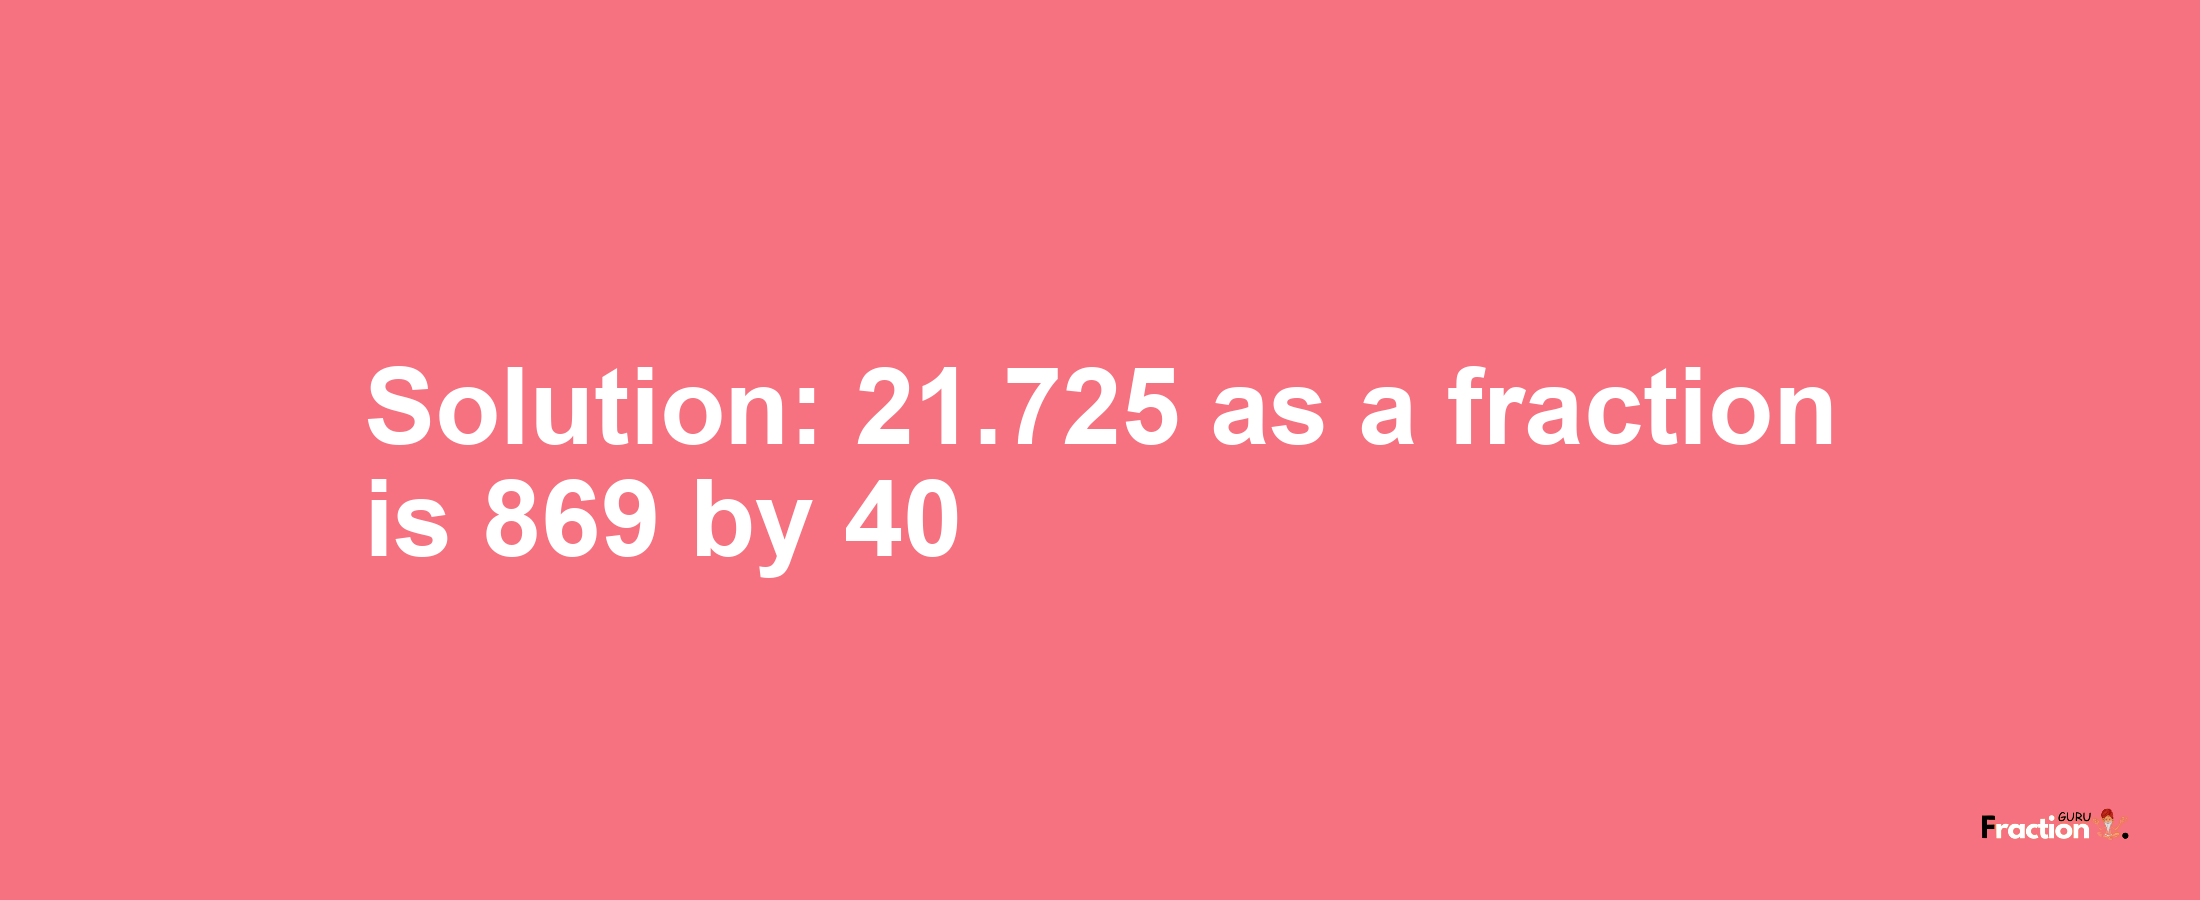 Solution:21.725 as a fraction is 869/40